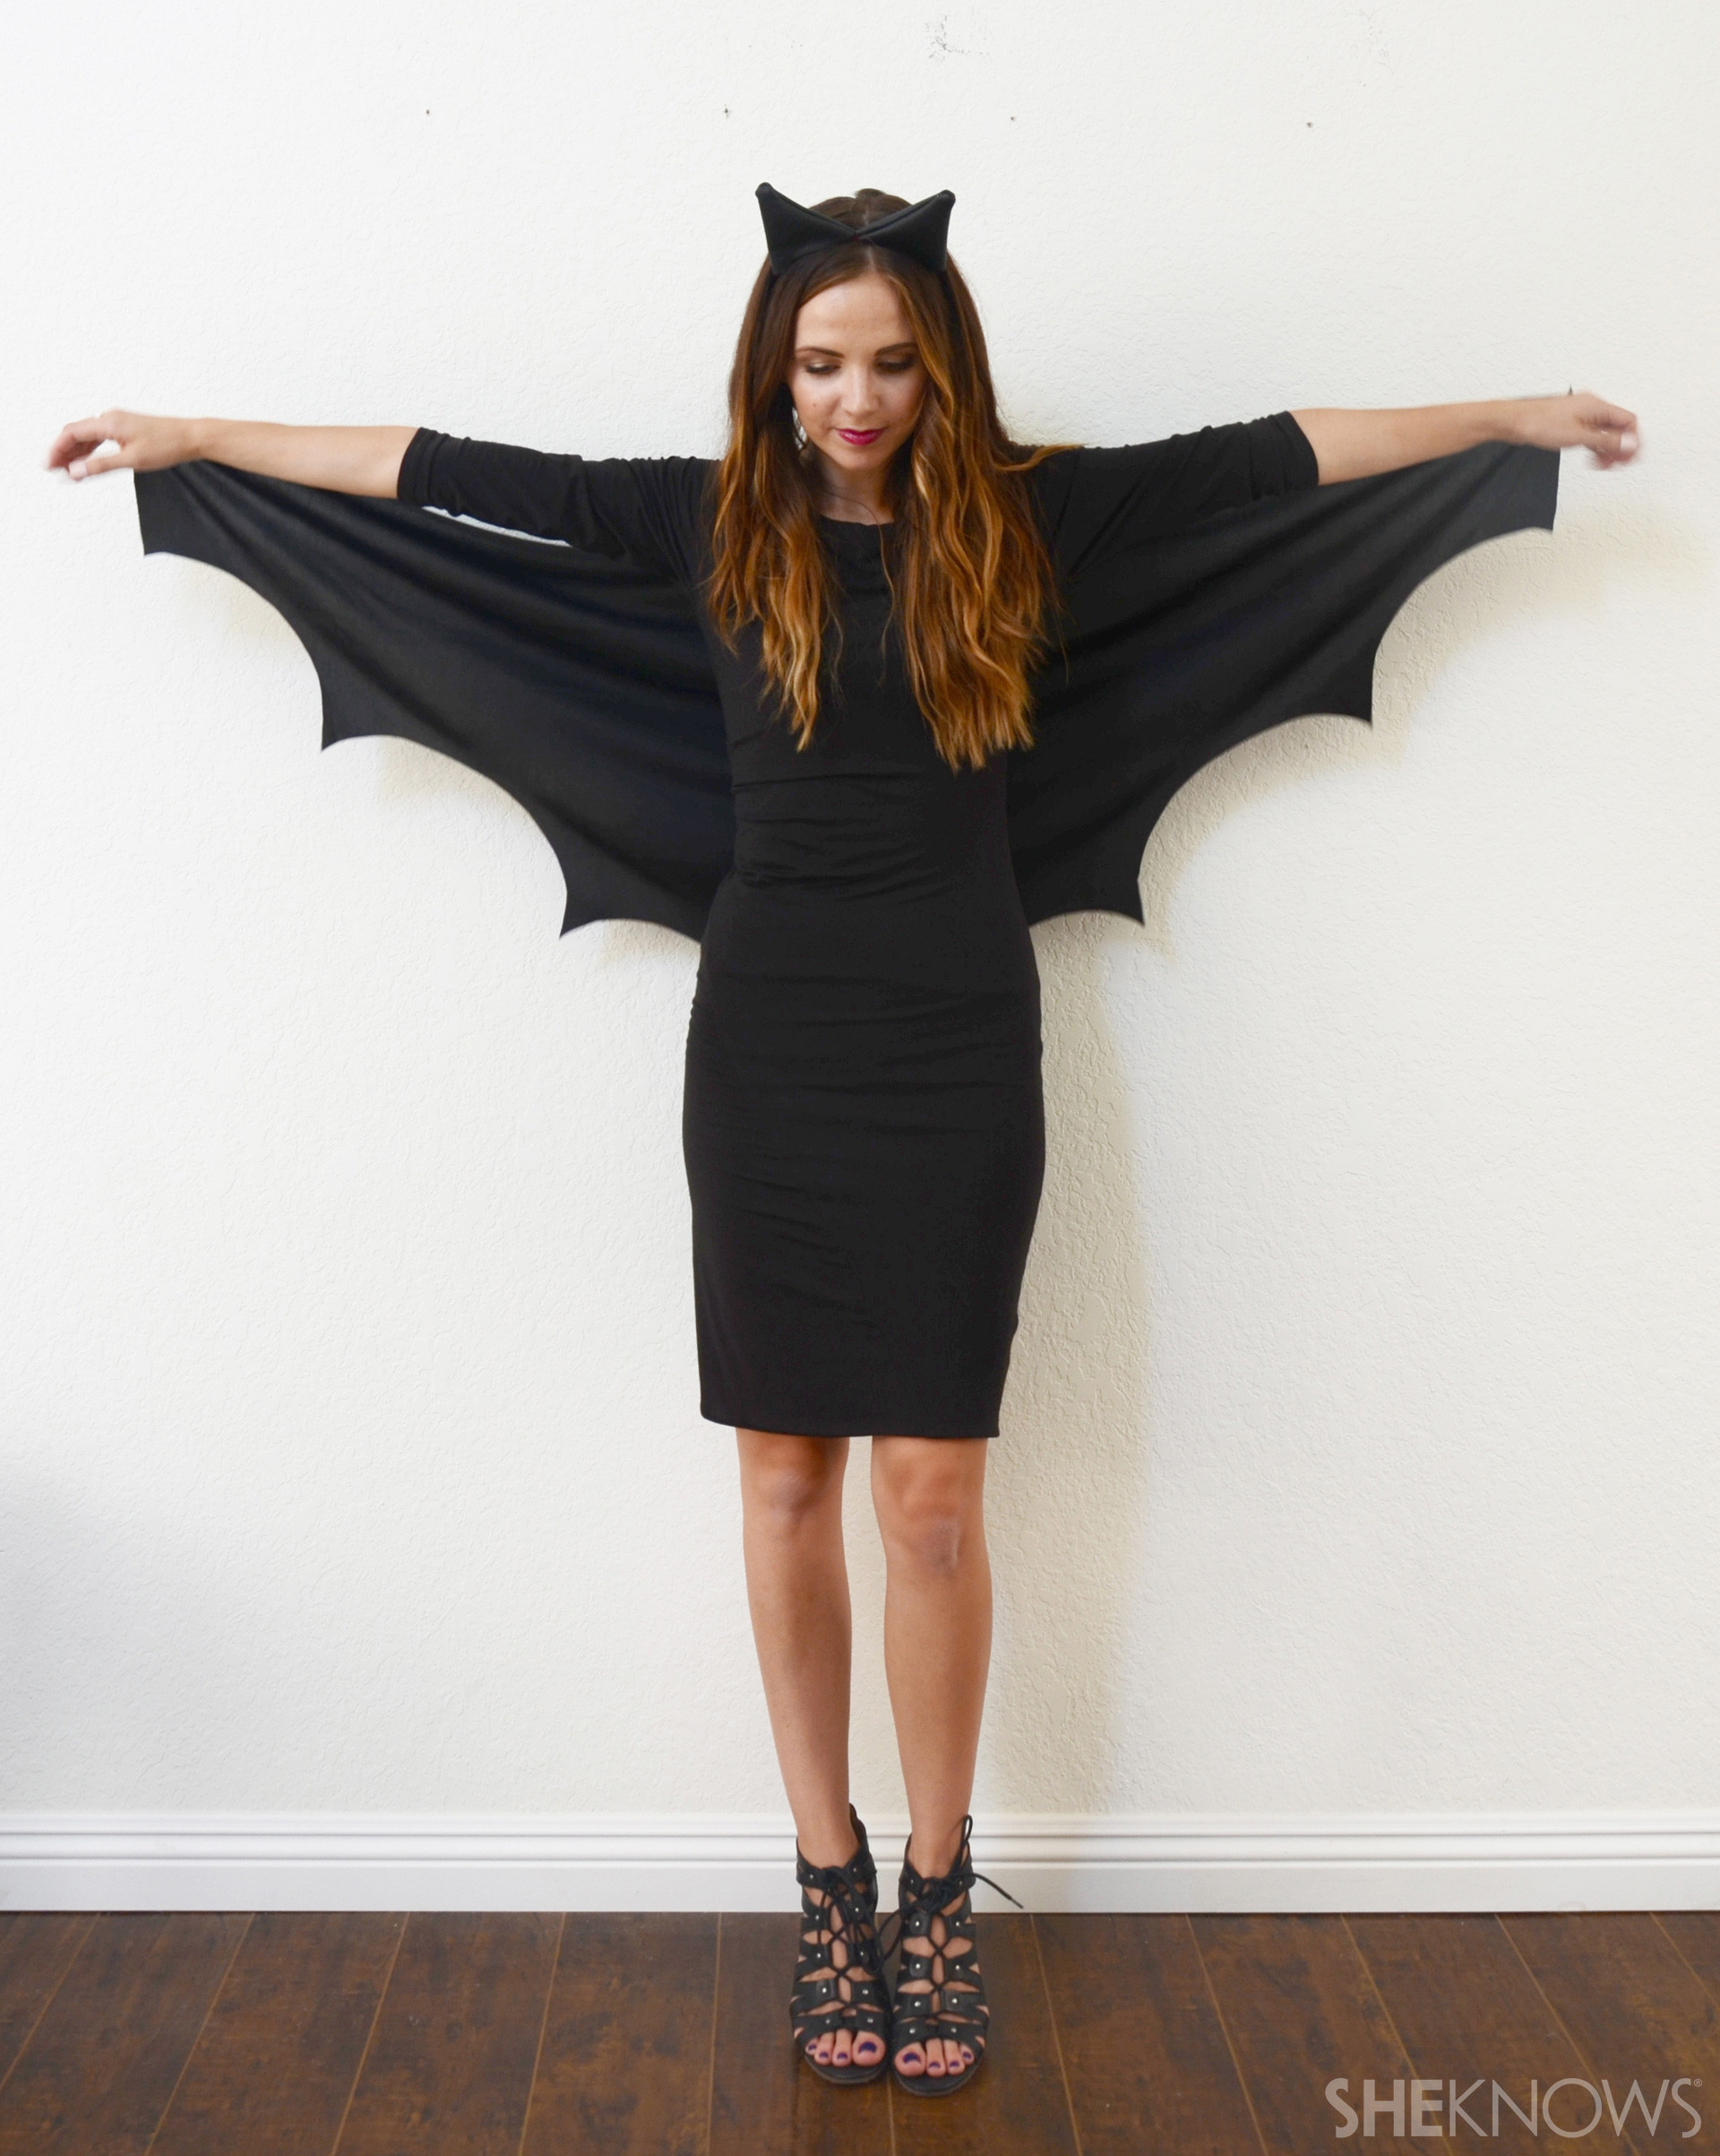 Easy DIY Costumes For Women
 A DIY Bat Costume so Easy No e Will Know It ly Took 10